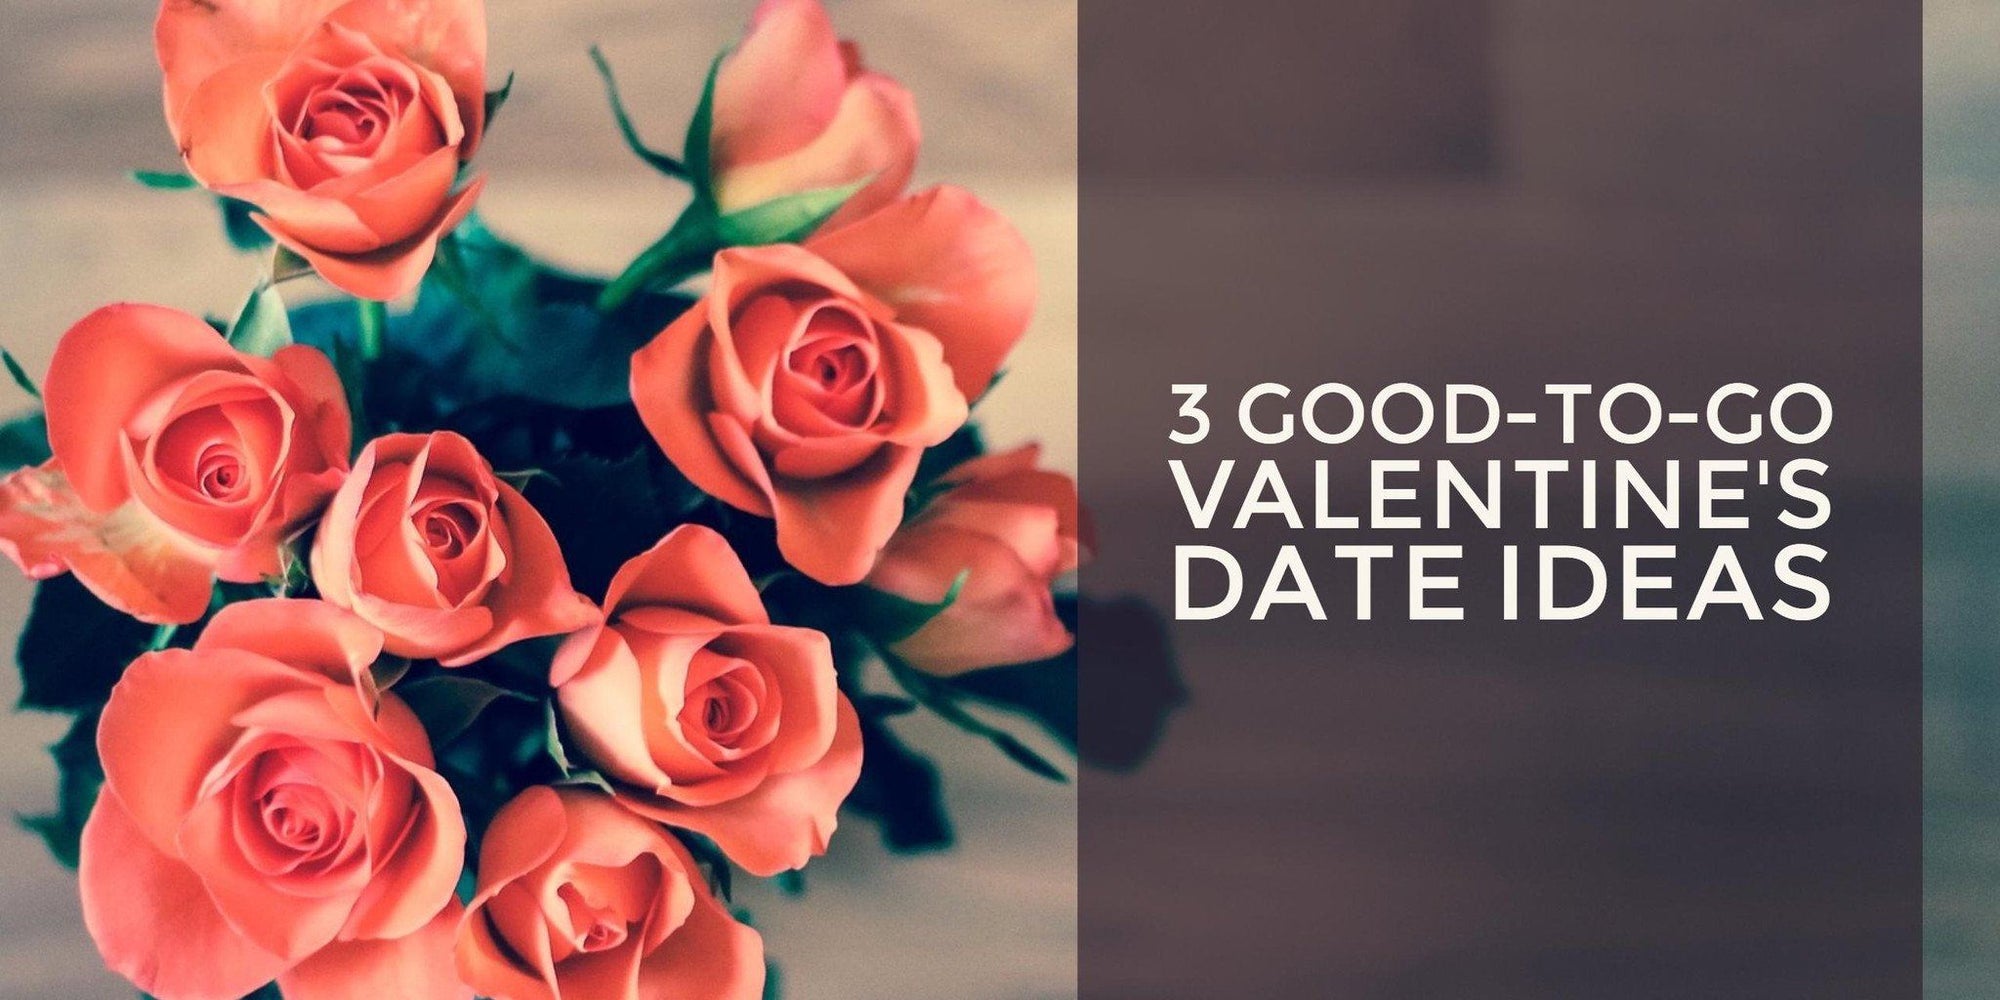 Awesome Last-Minute Valentine's Date Ideas